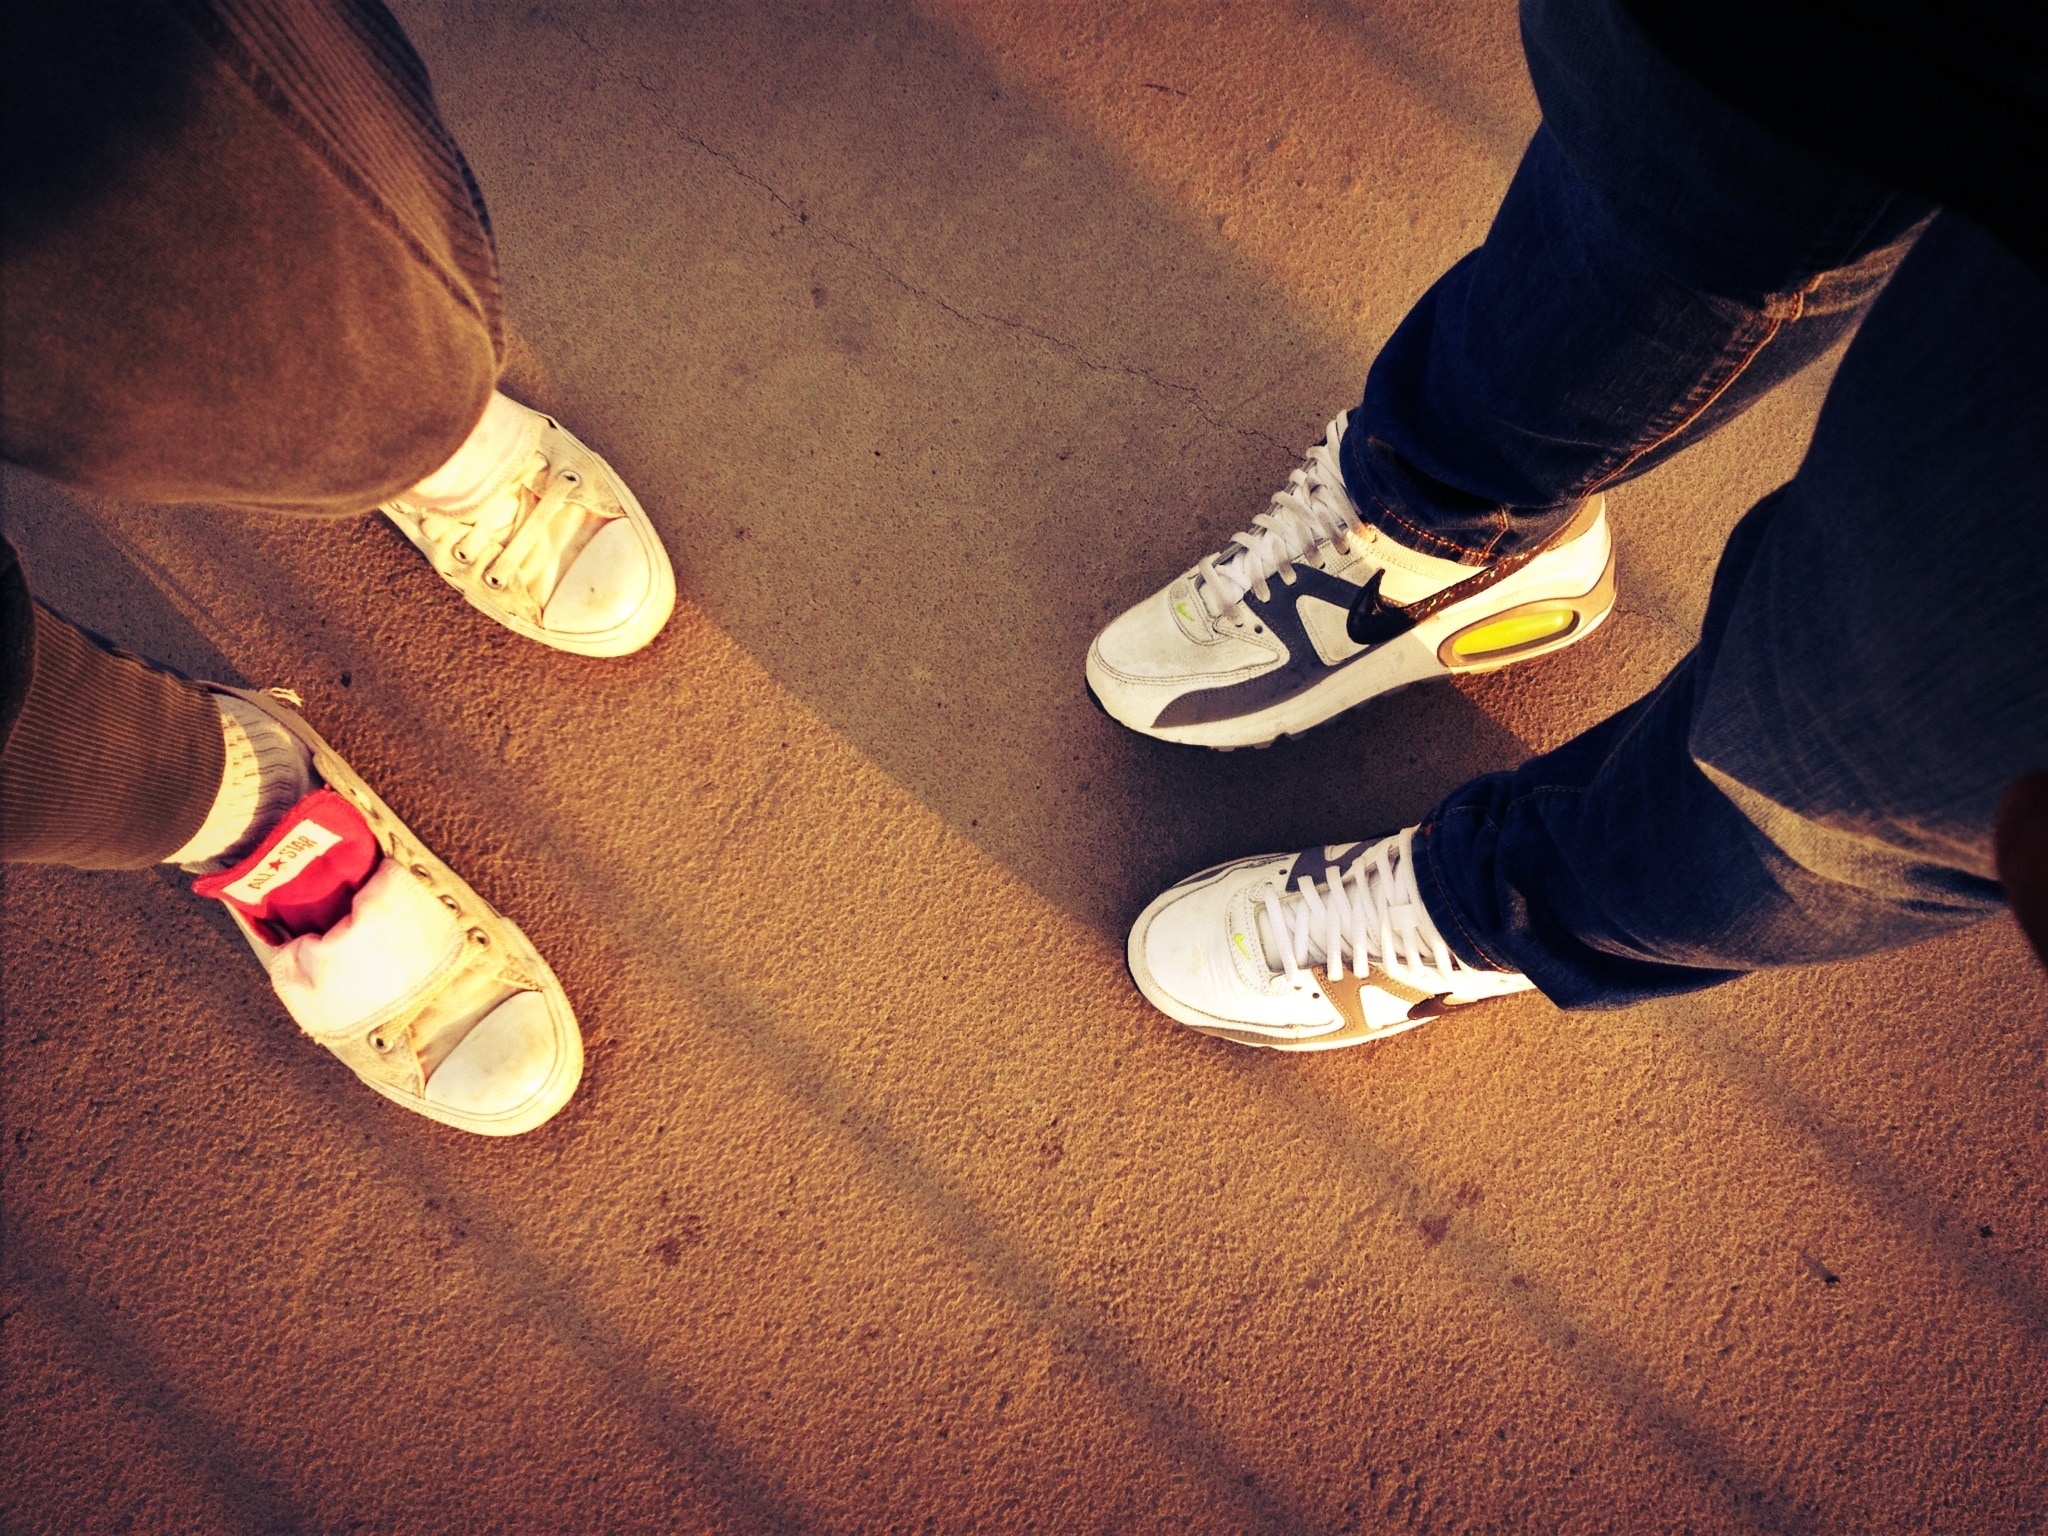 two person in sneakers standing on a cement floor